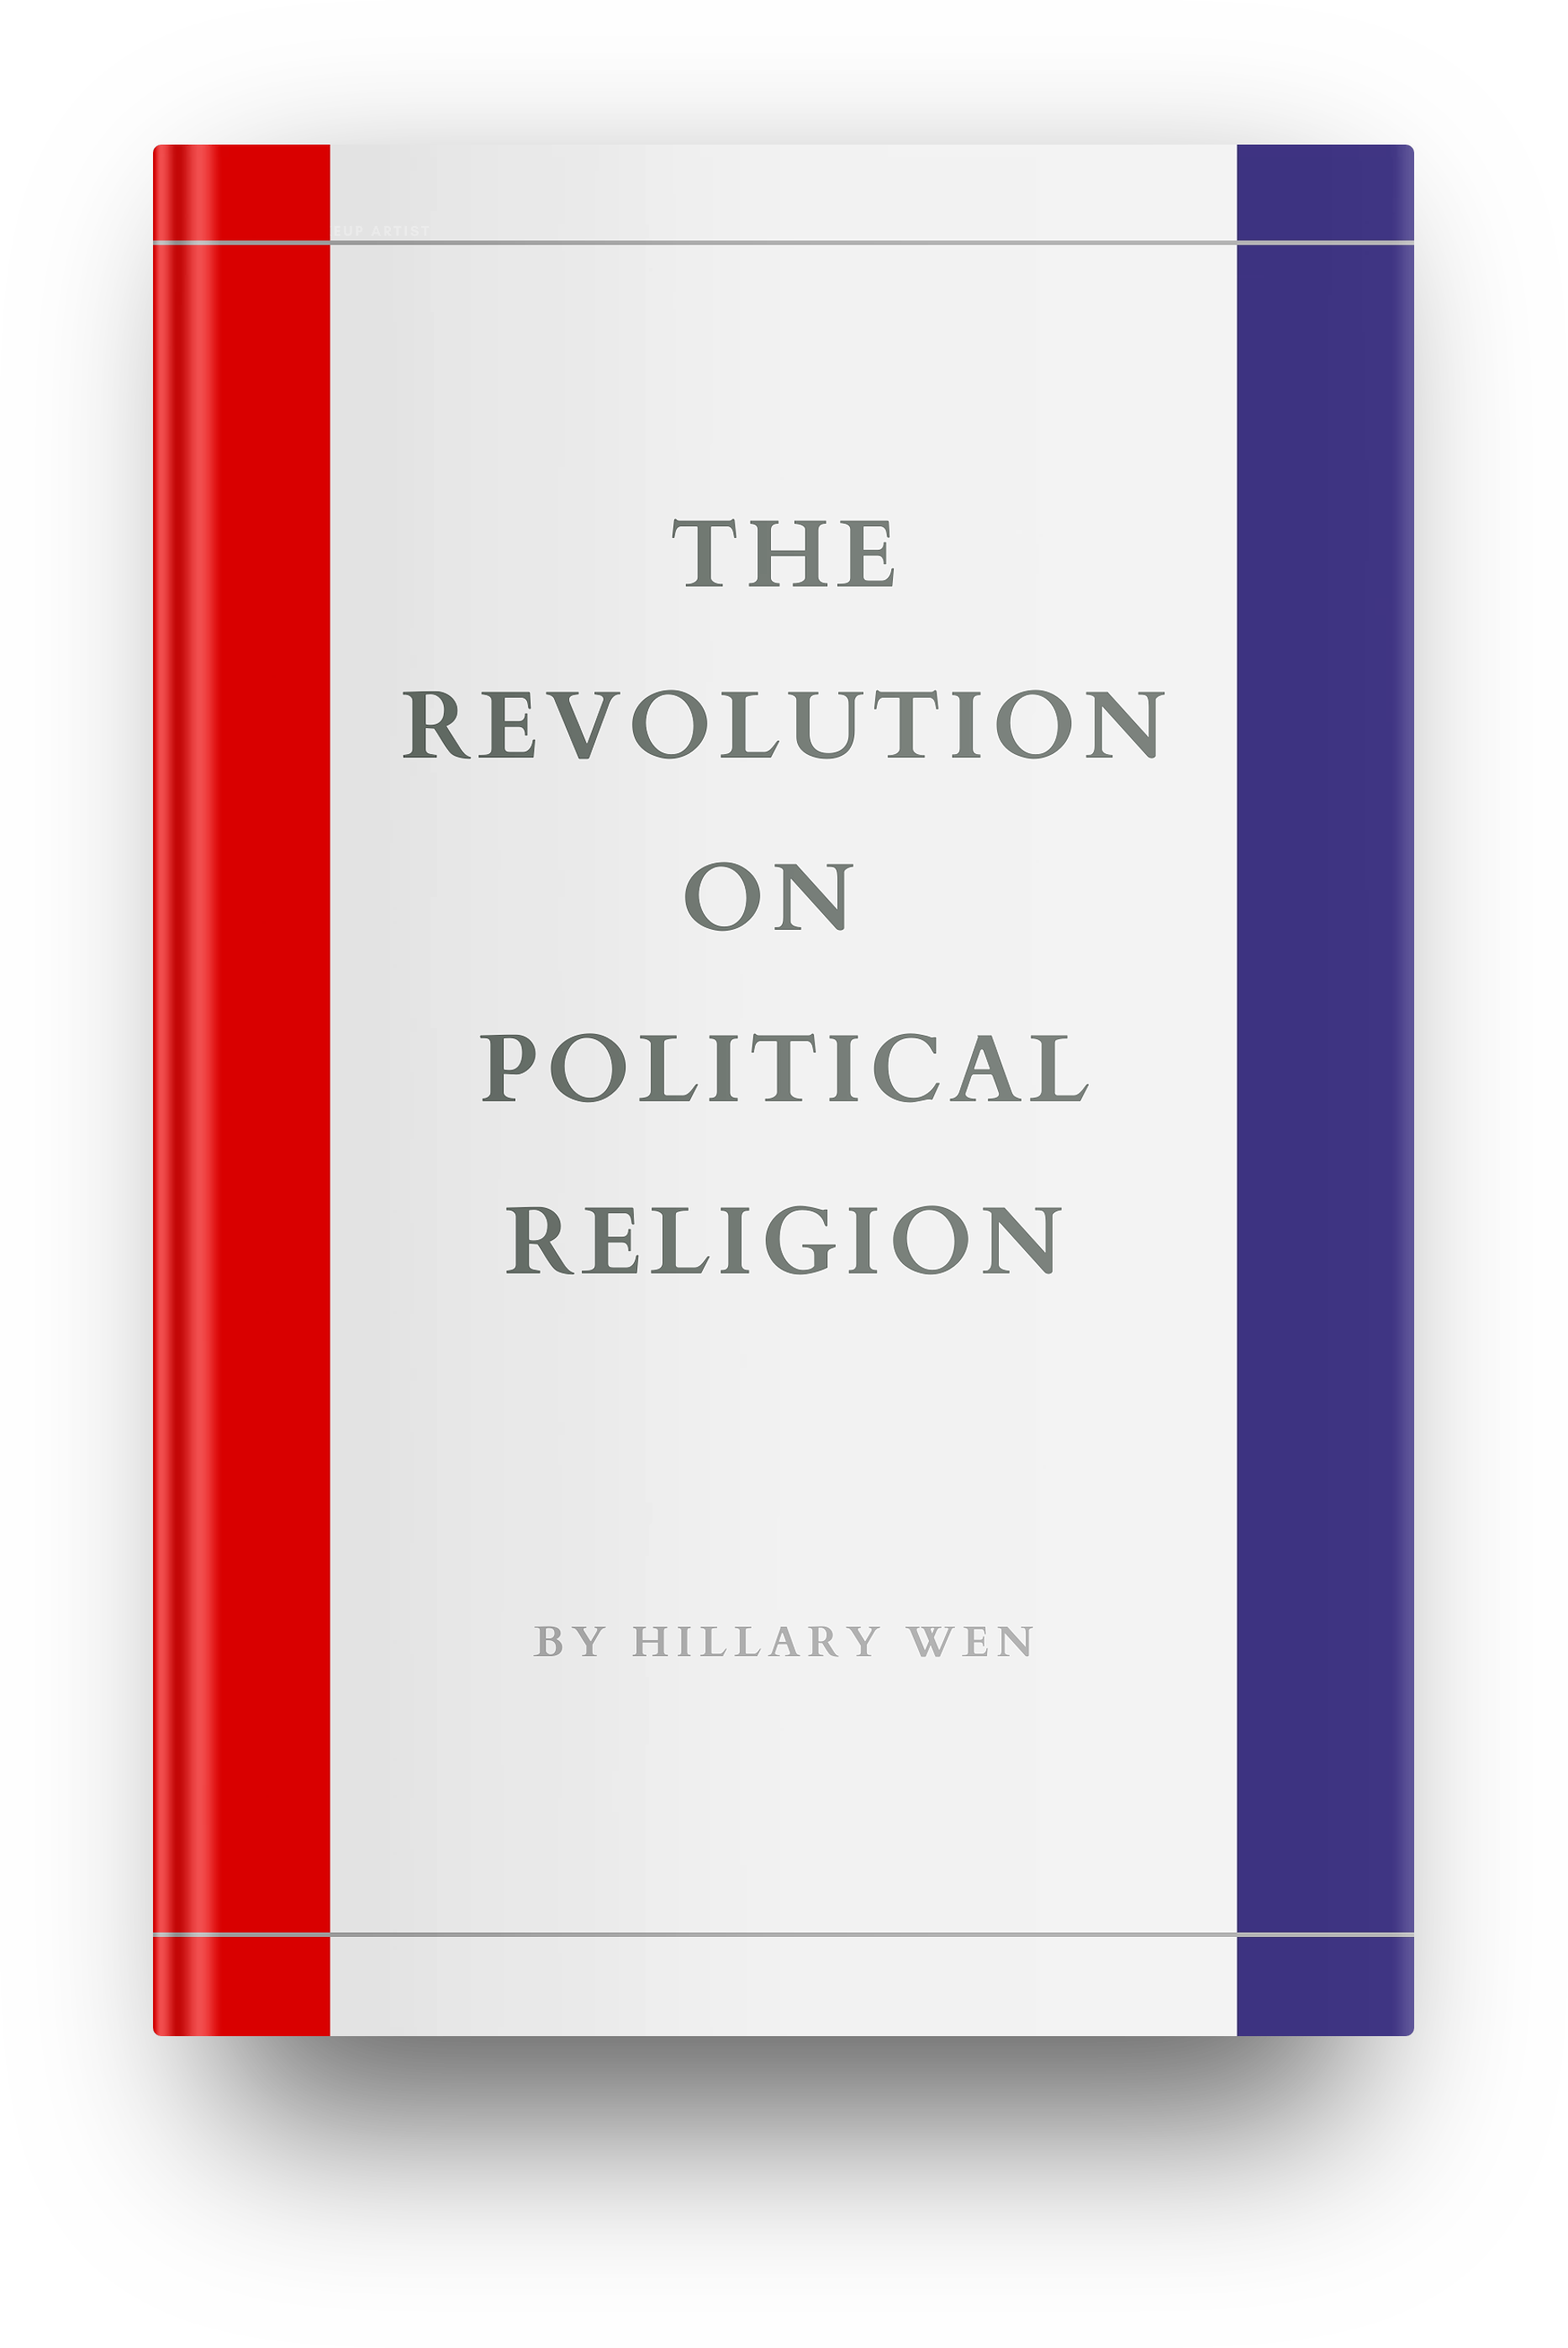 The Revolution on Political Religion By Hillary Wen